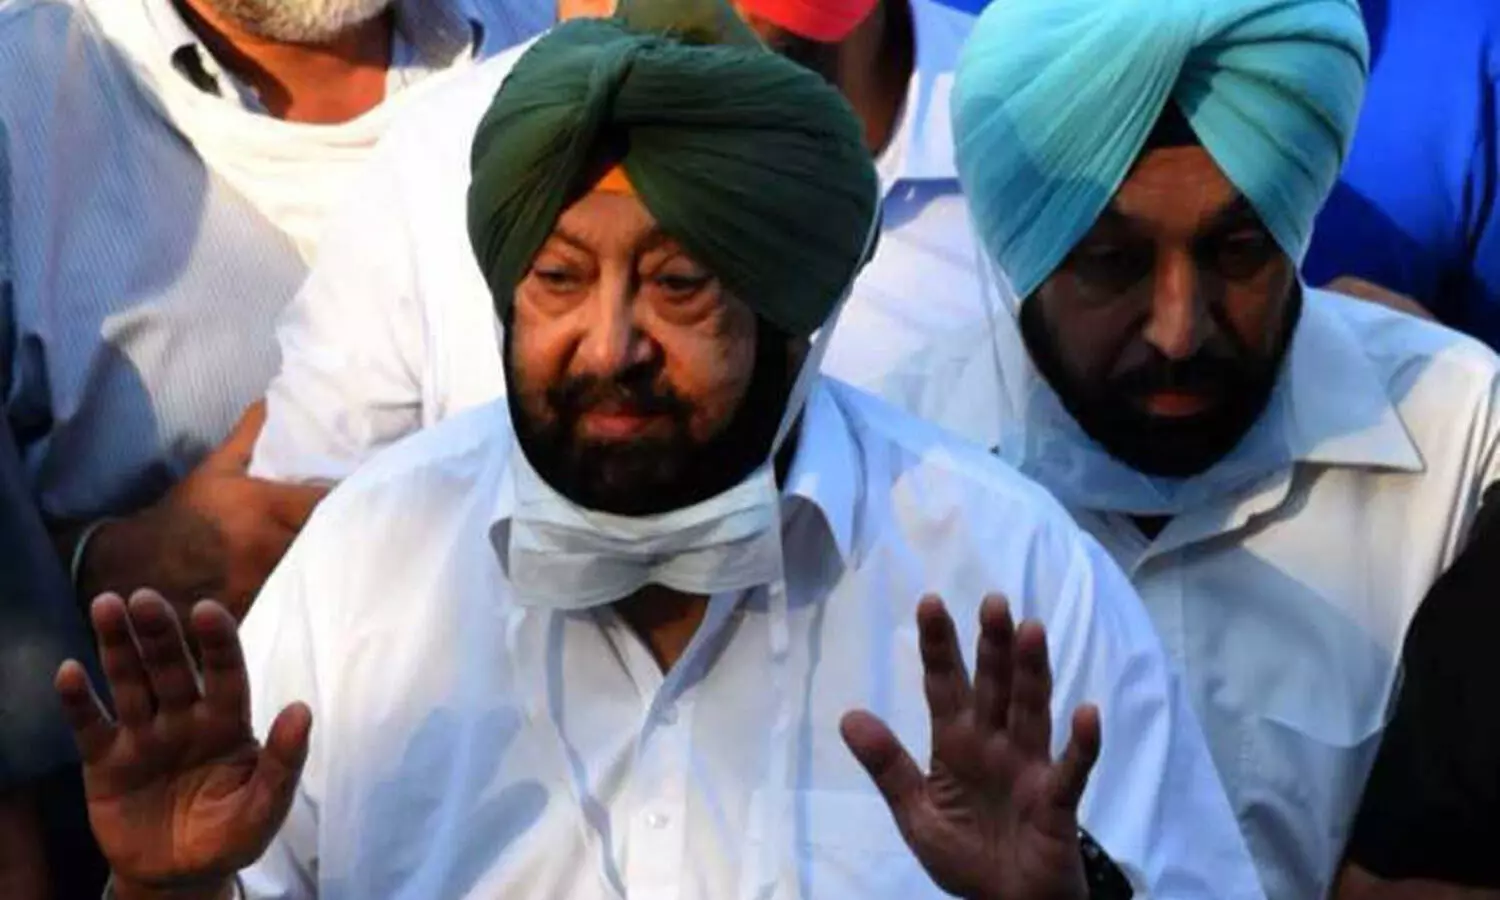 Amarinder Singh reaches Delhi, says not here to meet any politician